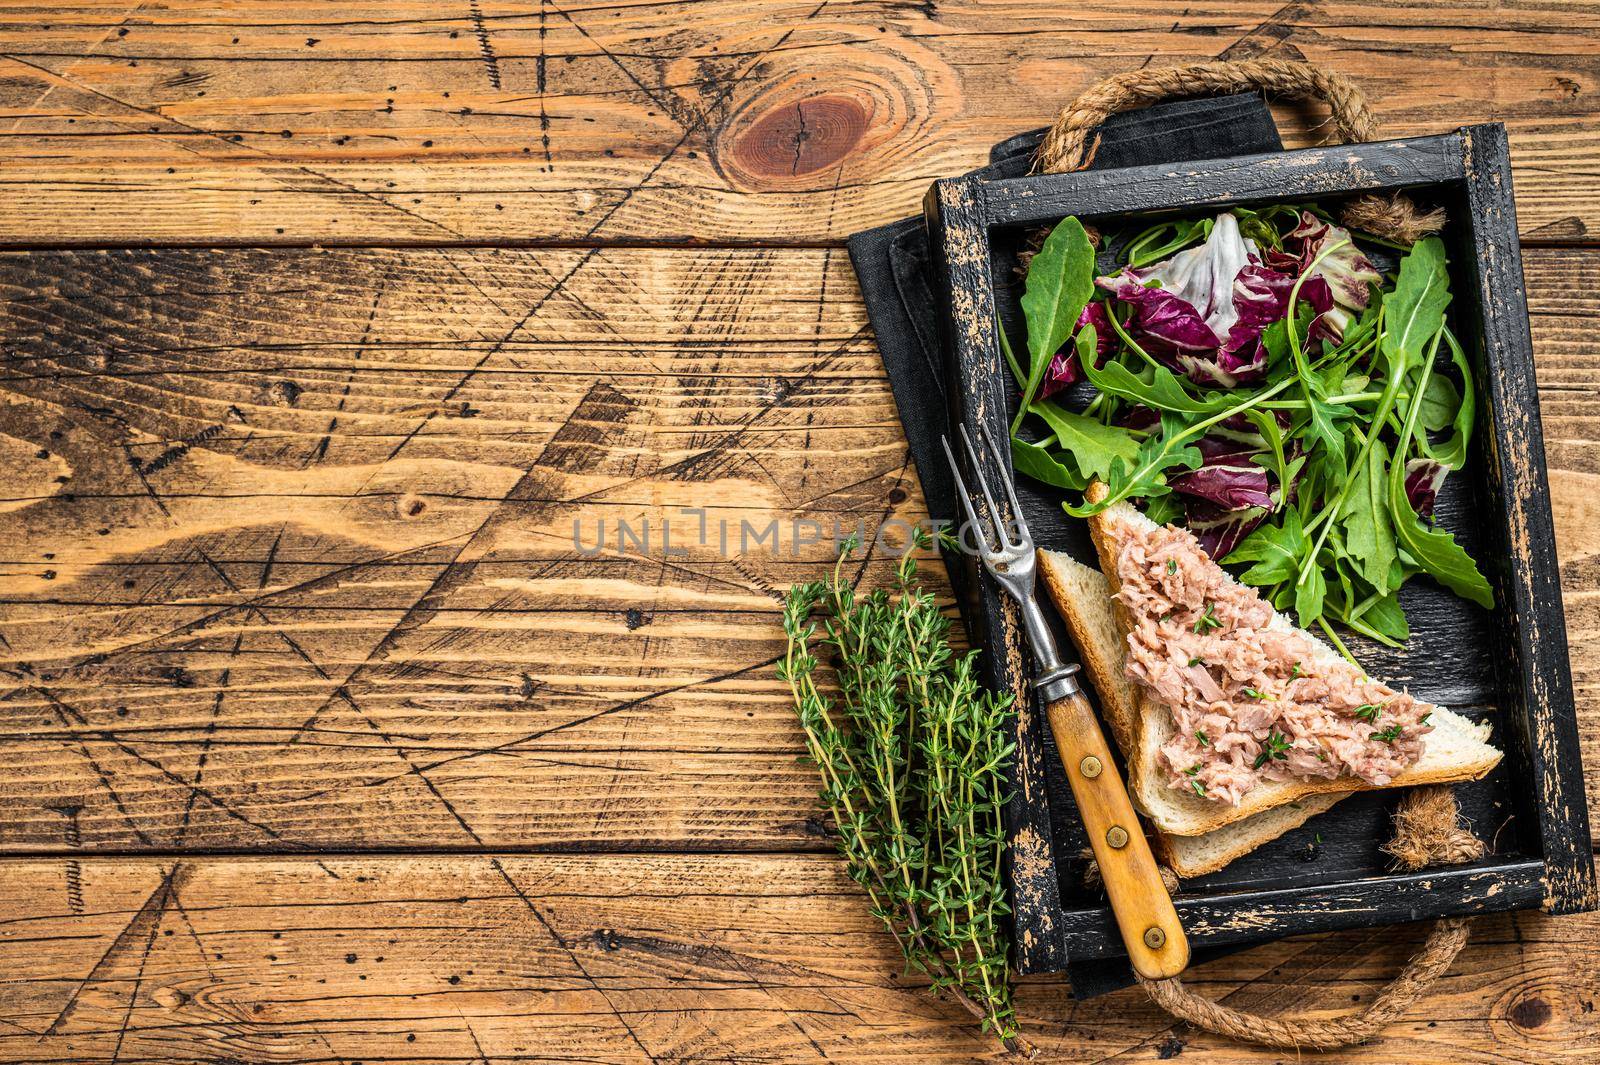 Tuna Salad Sandwich with Cheese, lettuce and arugula. Wooden background. Top view. Copy space.